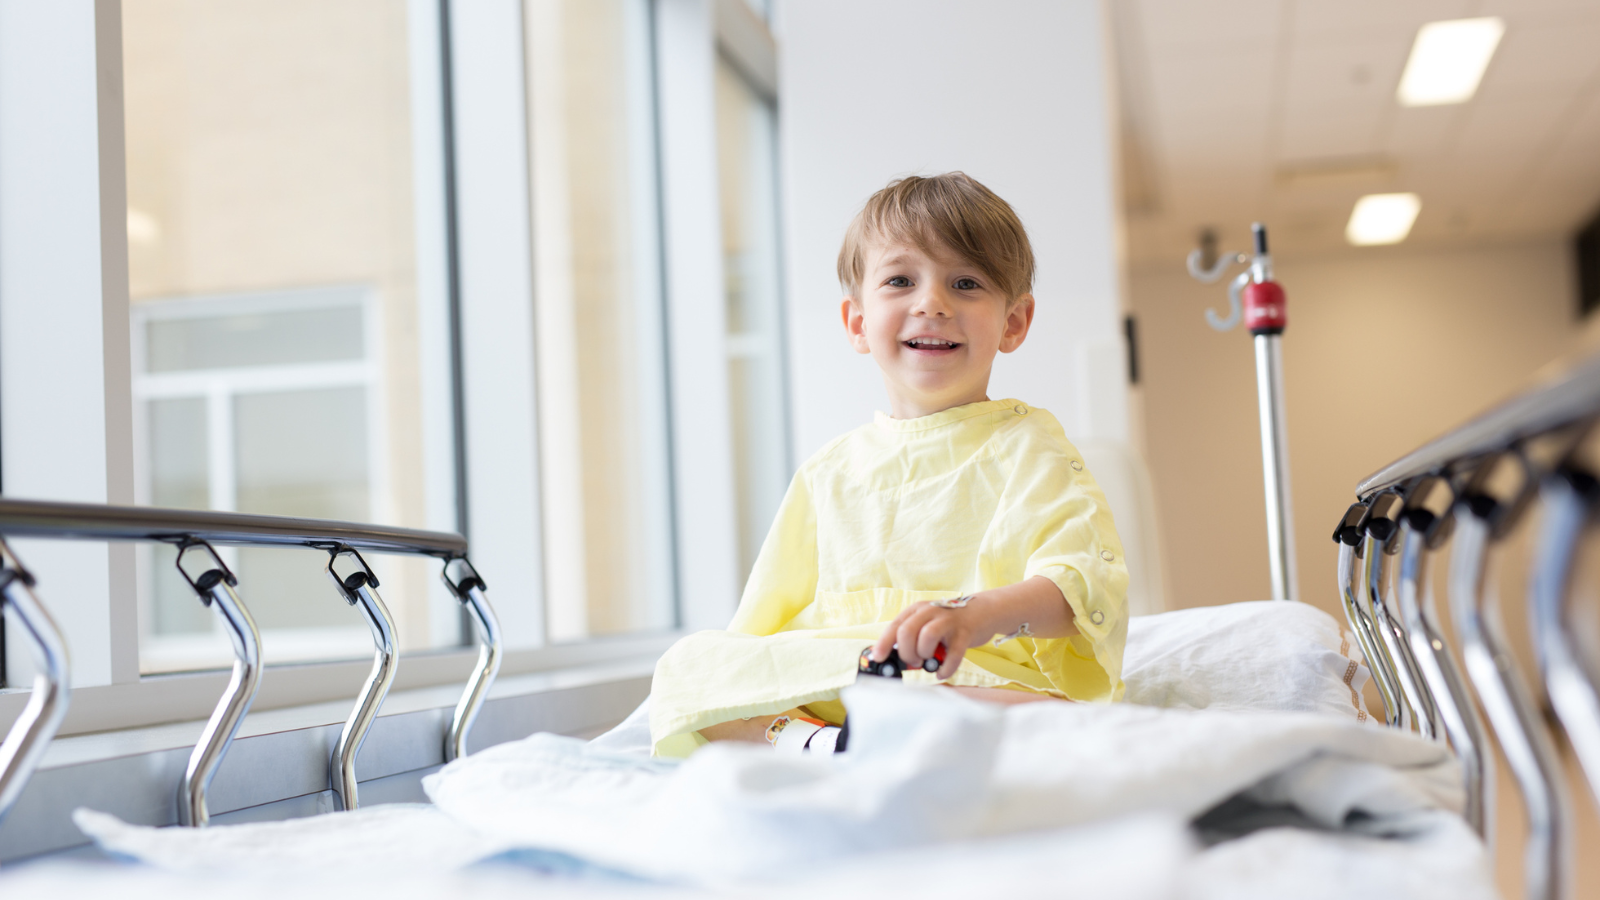 A child sitting on a hospital bed.